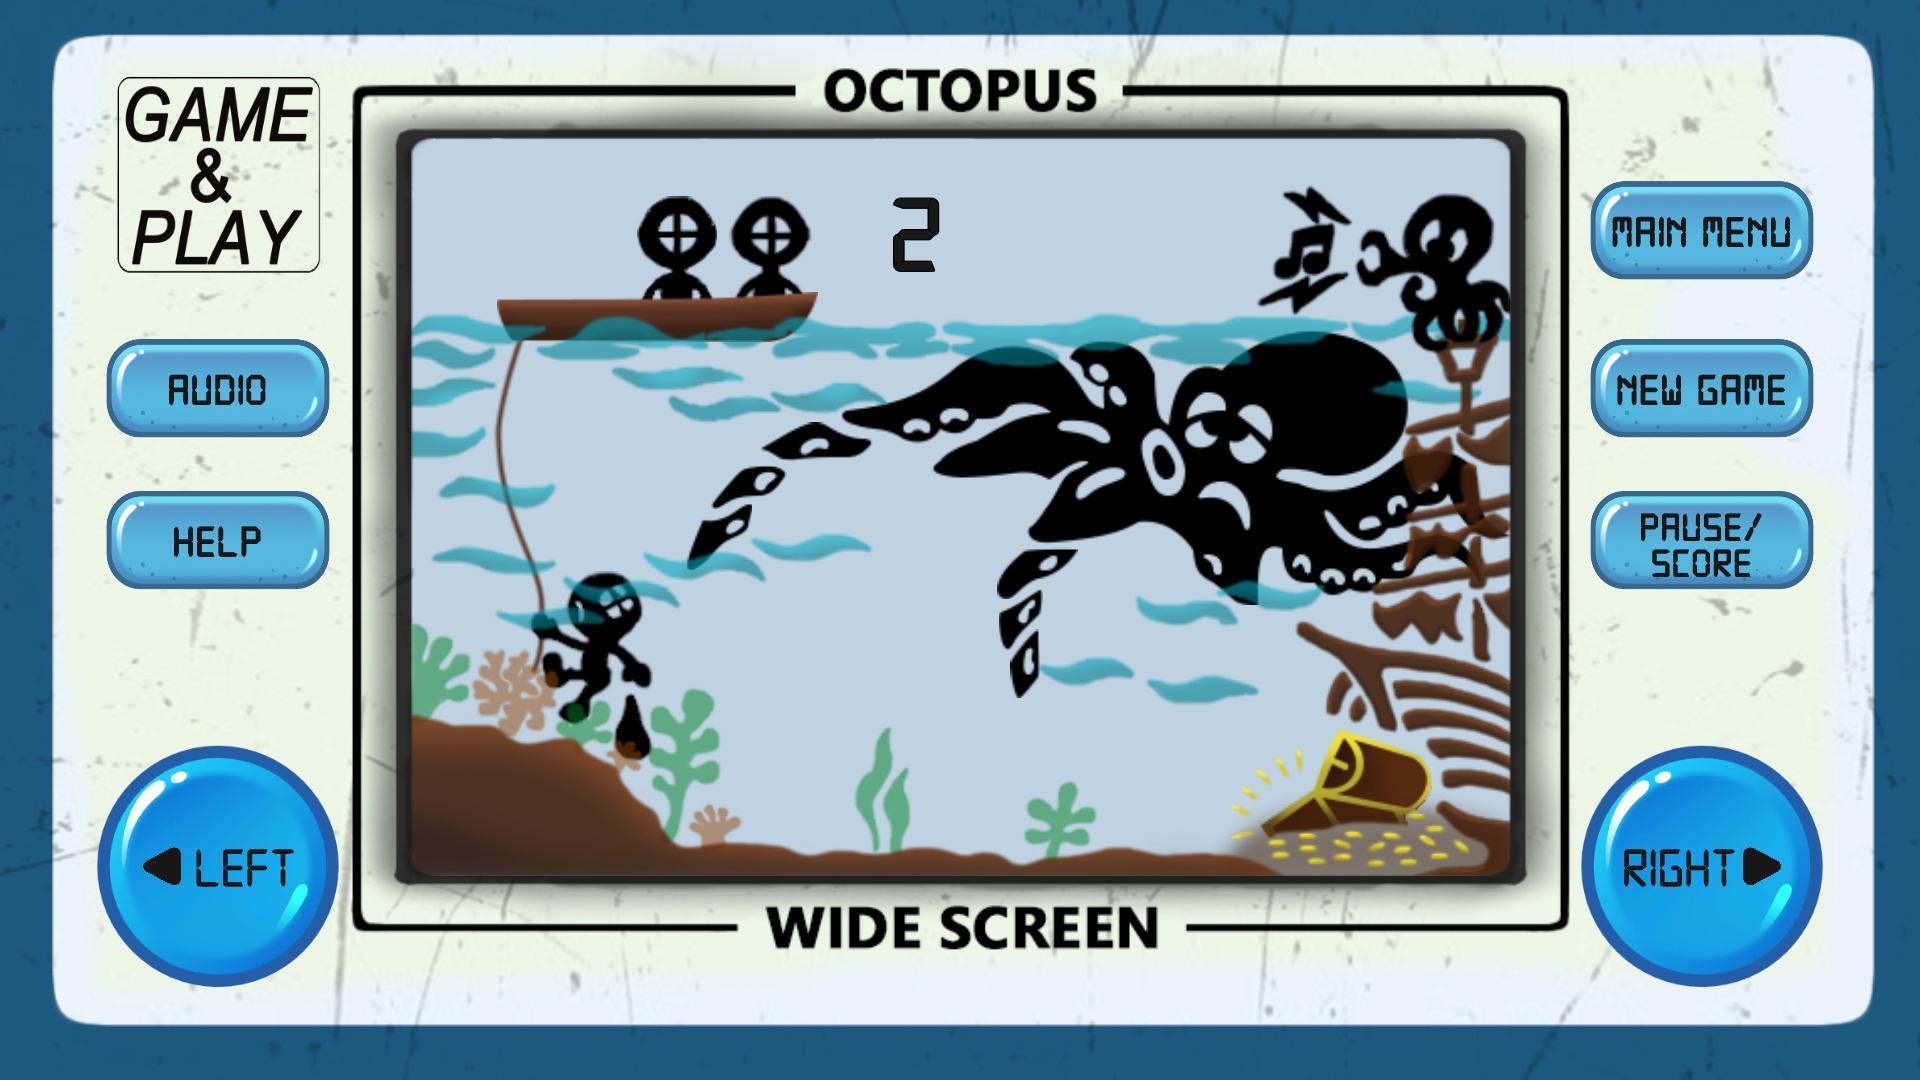 Octopus 80s Arcade Games For Android Apk Download - roblox octopus game